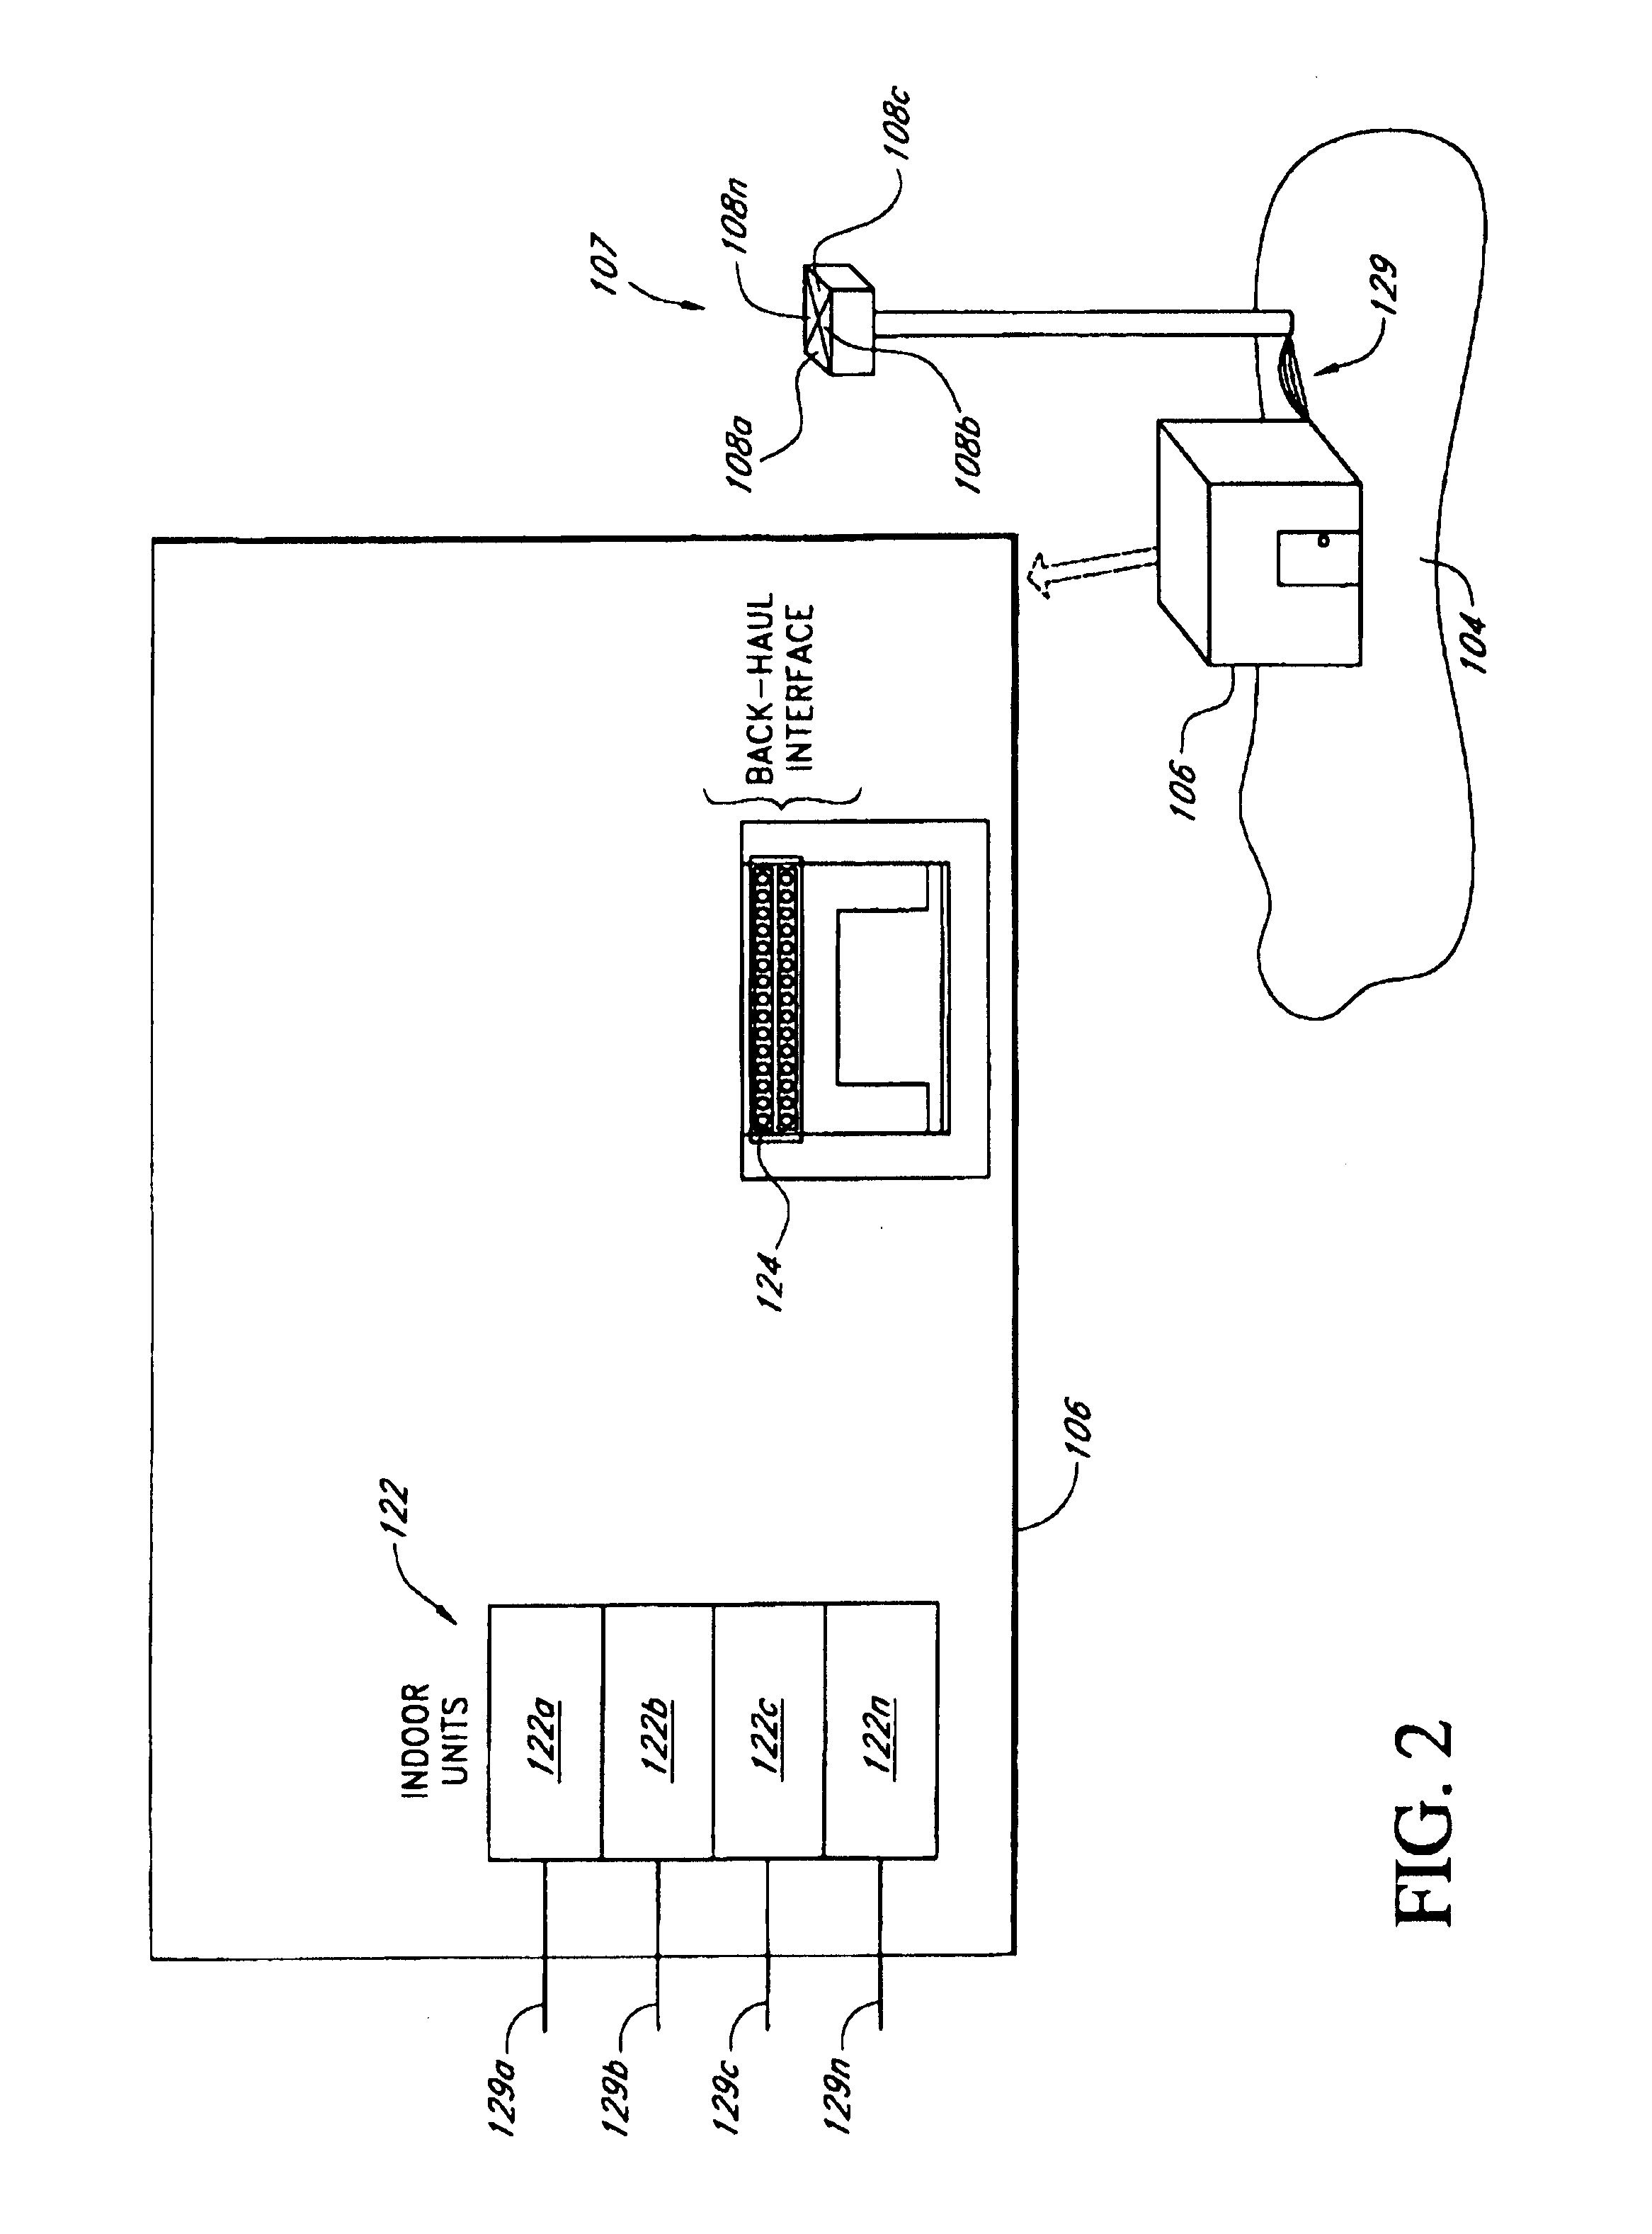 System and method of automatically calibrating the gain for a distributed wireless communication system